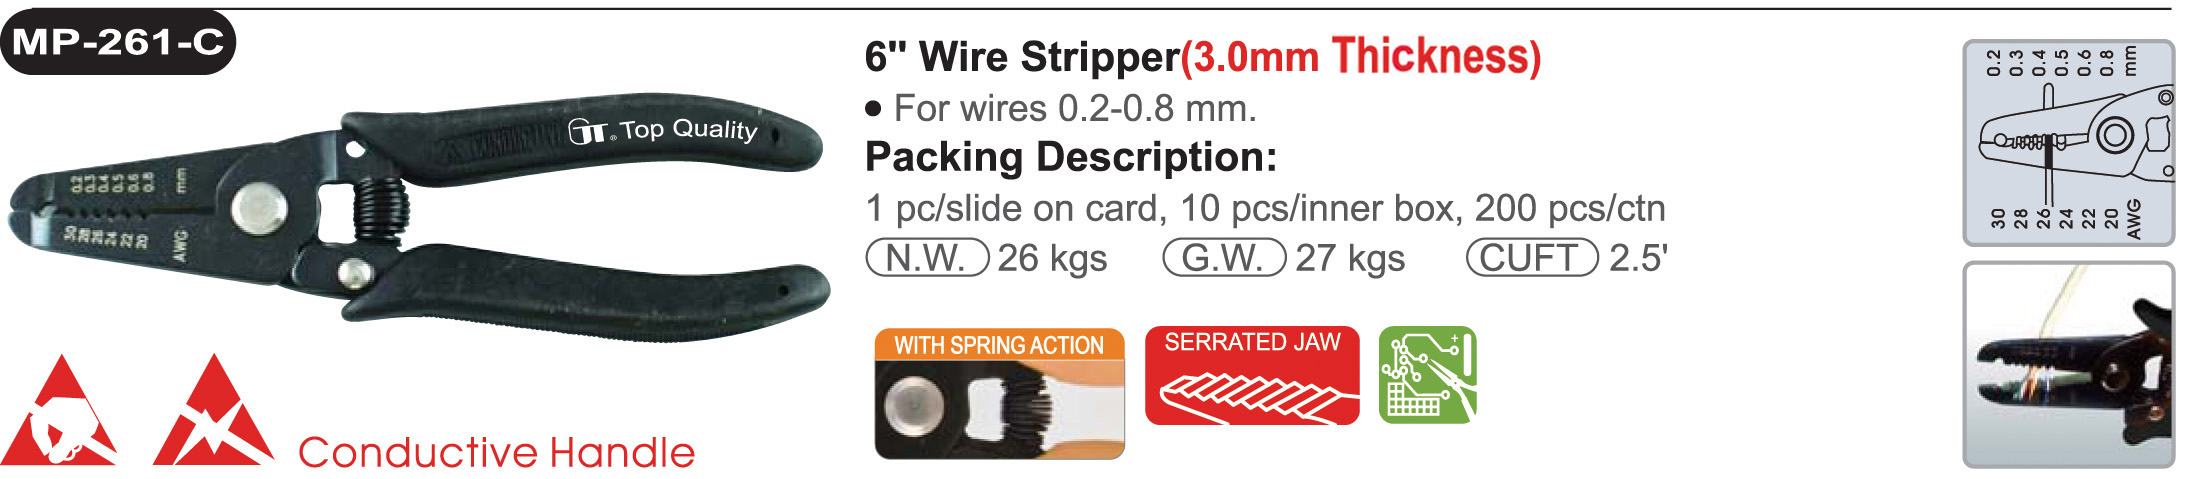 proimages/product/pliers/wire_strippers/ELECTRONICS_WIRE_STRIPPER_ESD/MP-261C/MP-261-C.jpg